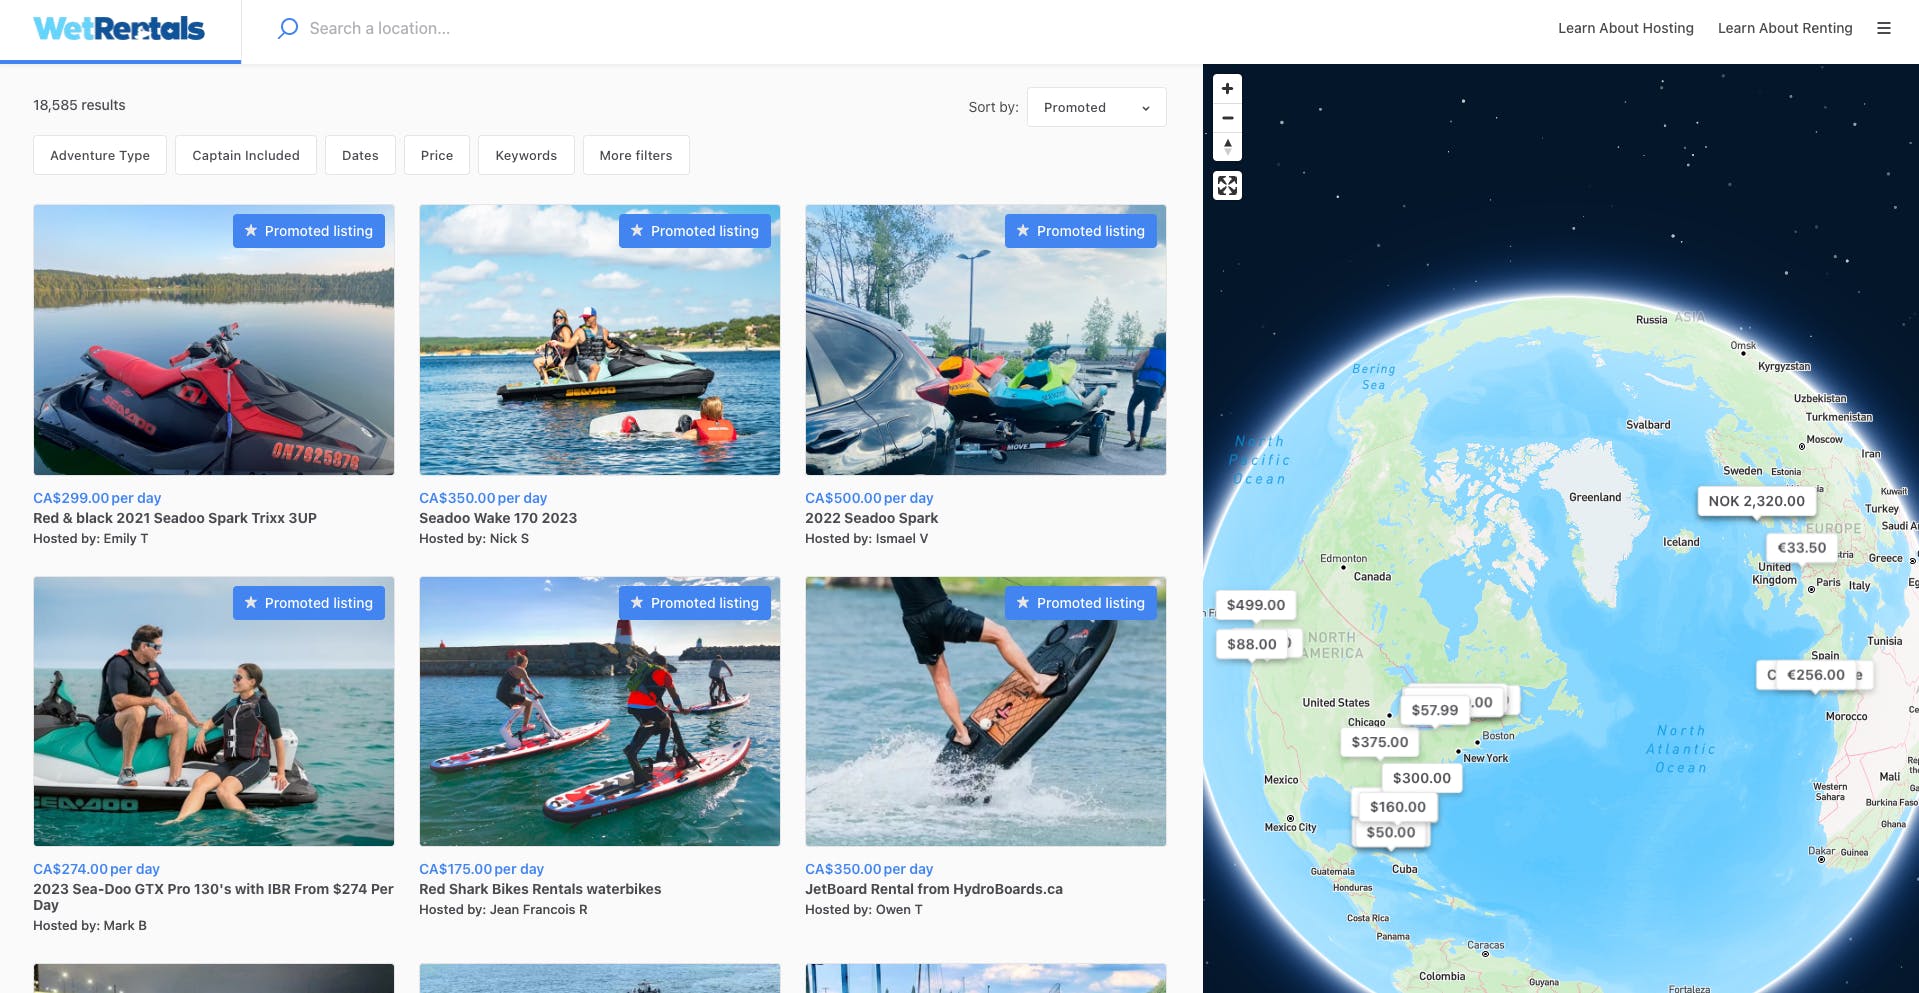 The listing page of the Sharetribe-powered peer-to-peer rental marketplace WetRentals, showcasing over 18,000 listings for boat rentals across the world.